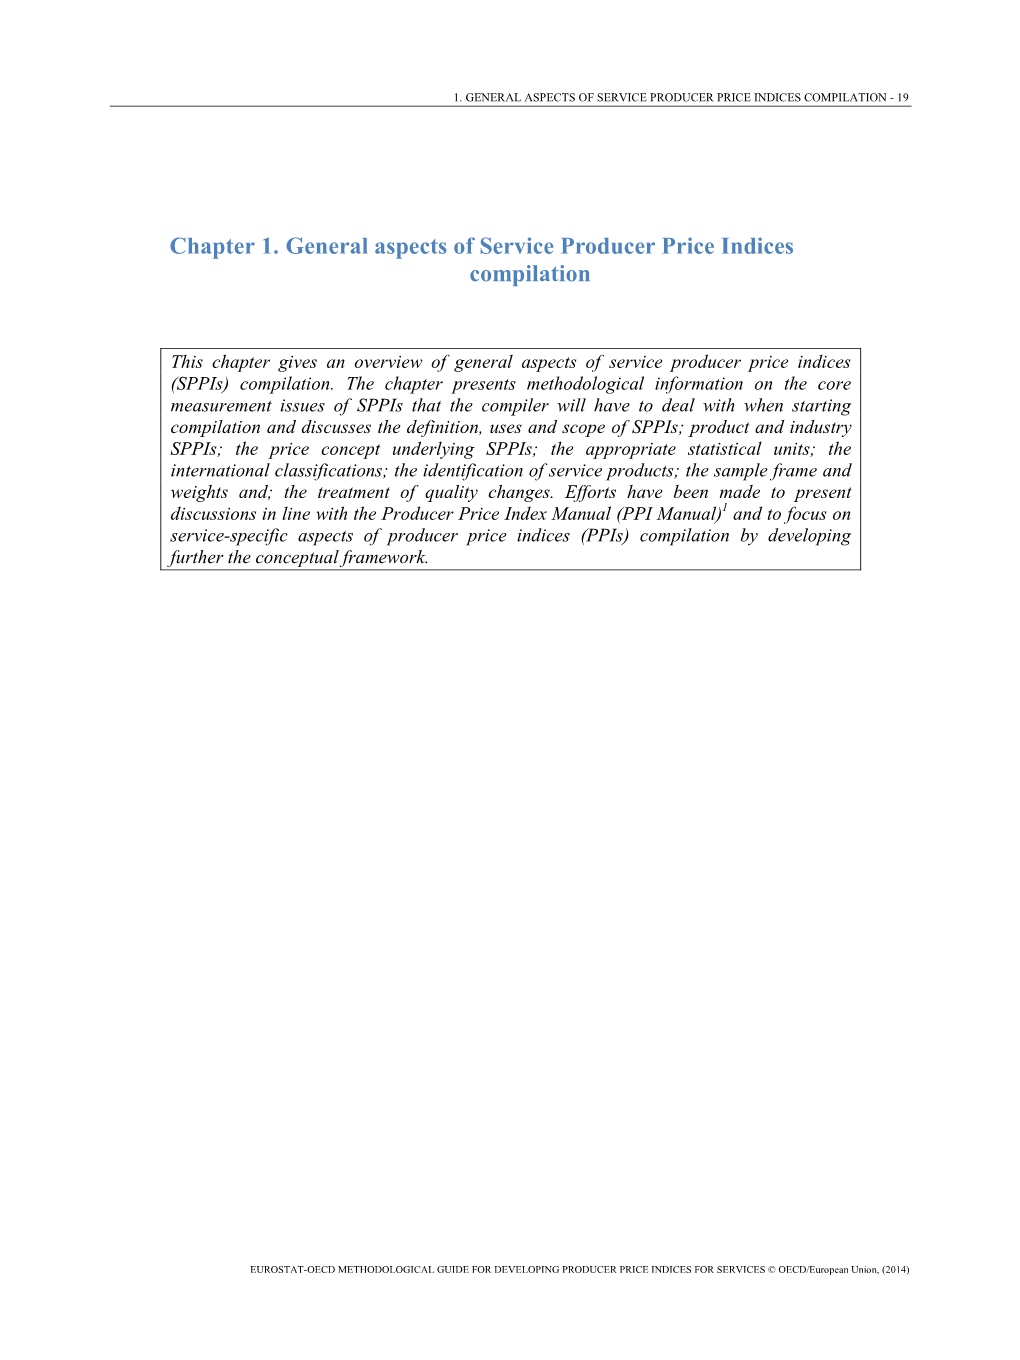 Chapter 1. General Aspects of Service Producer Price Indices Compilation